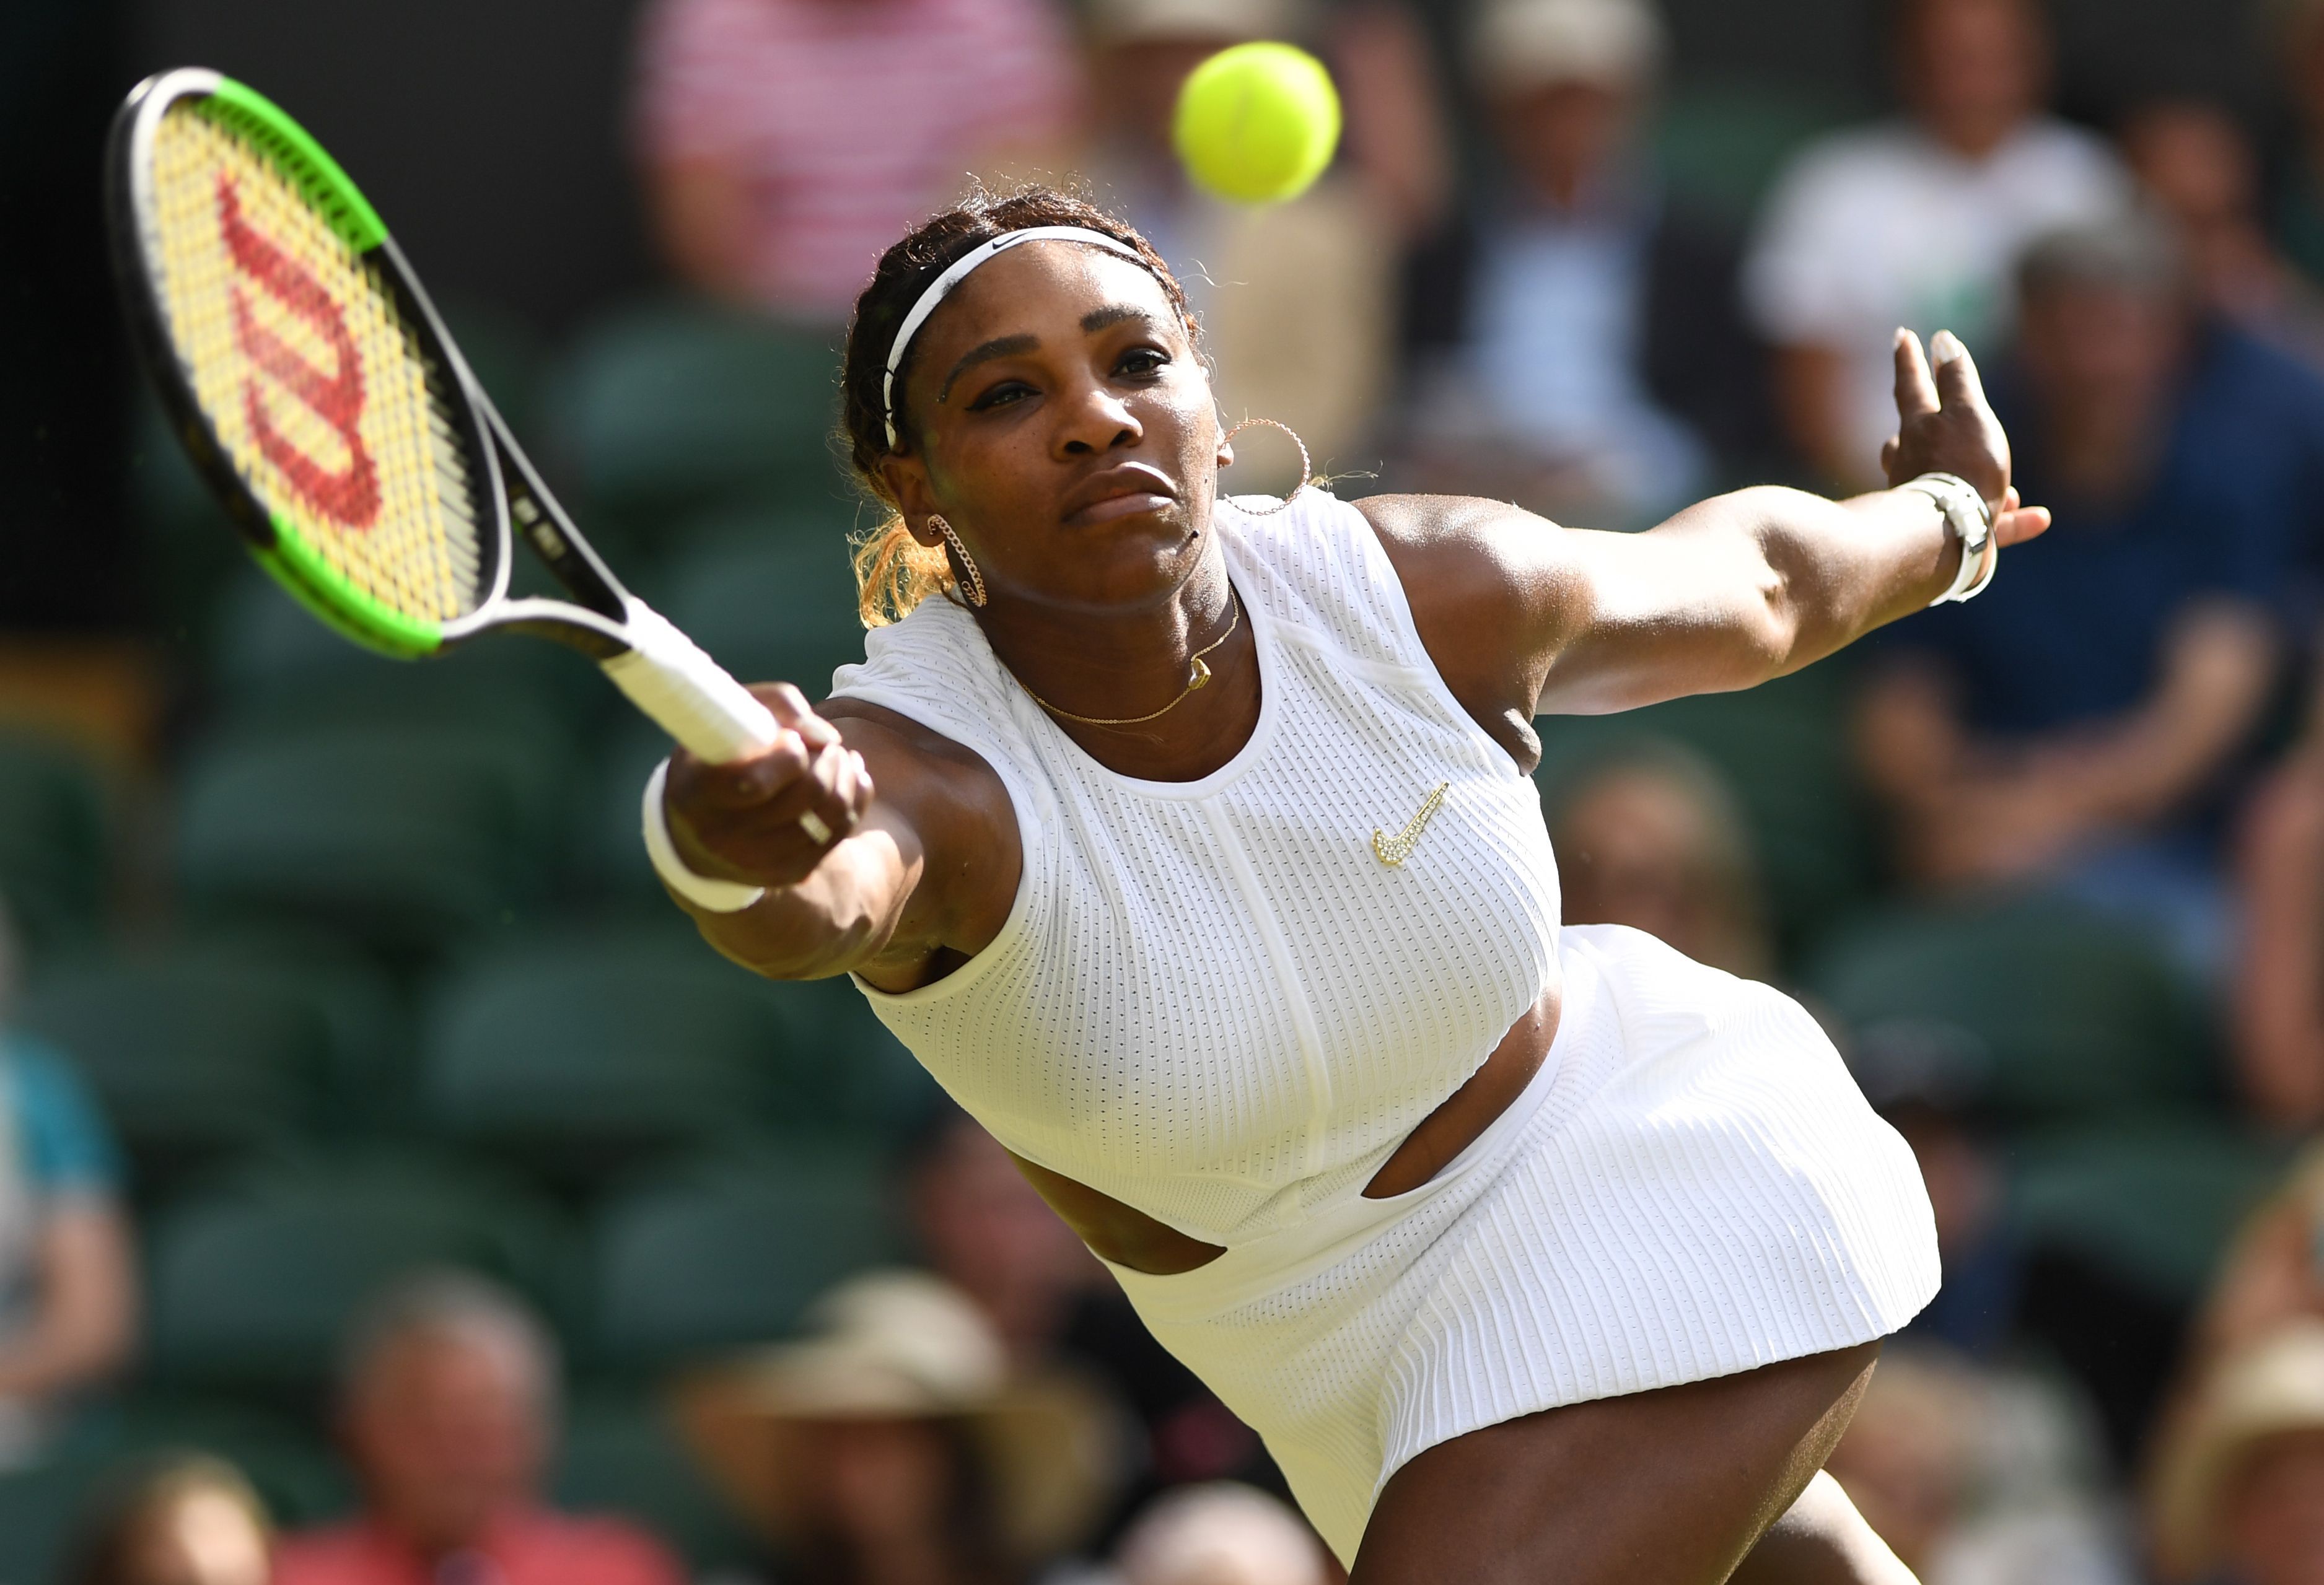 The meaning behind Serena Williams' outfit